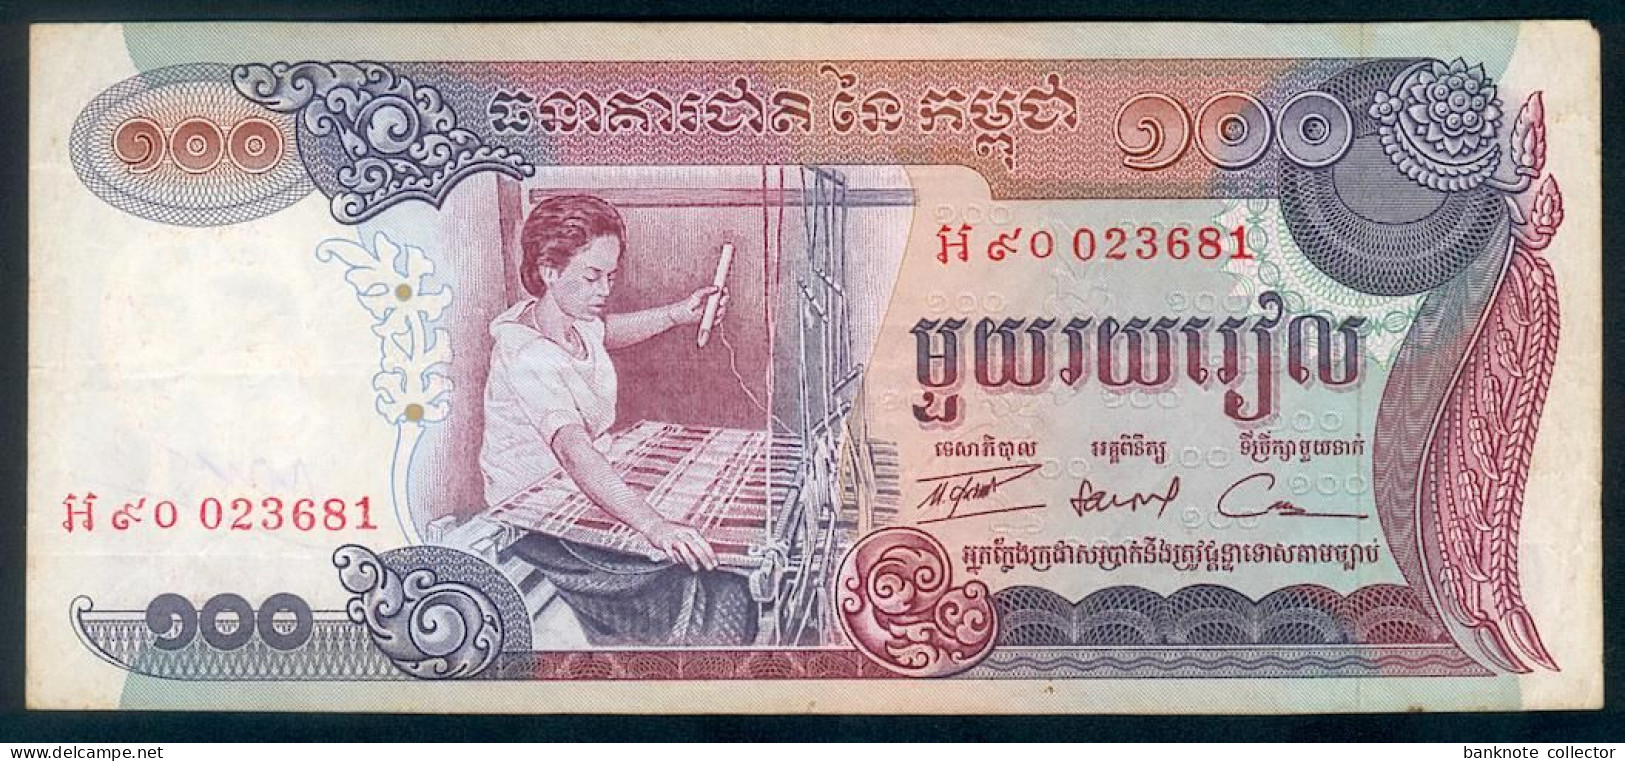 2 X Kambodscha - Replacement - Cambodia - 2 X 100 Riels - Pick 15a - Sign.13 - Replacement - 1972 - Sehr Selten - Cambodja